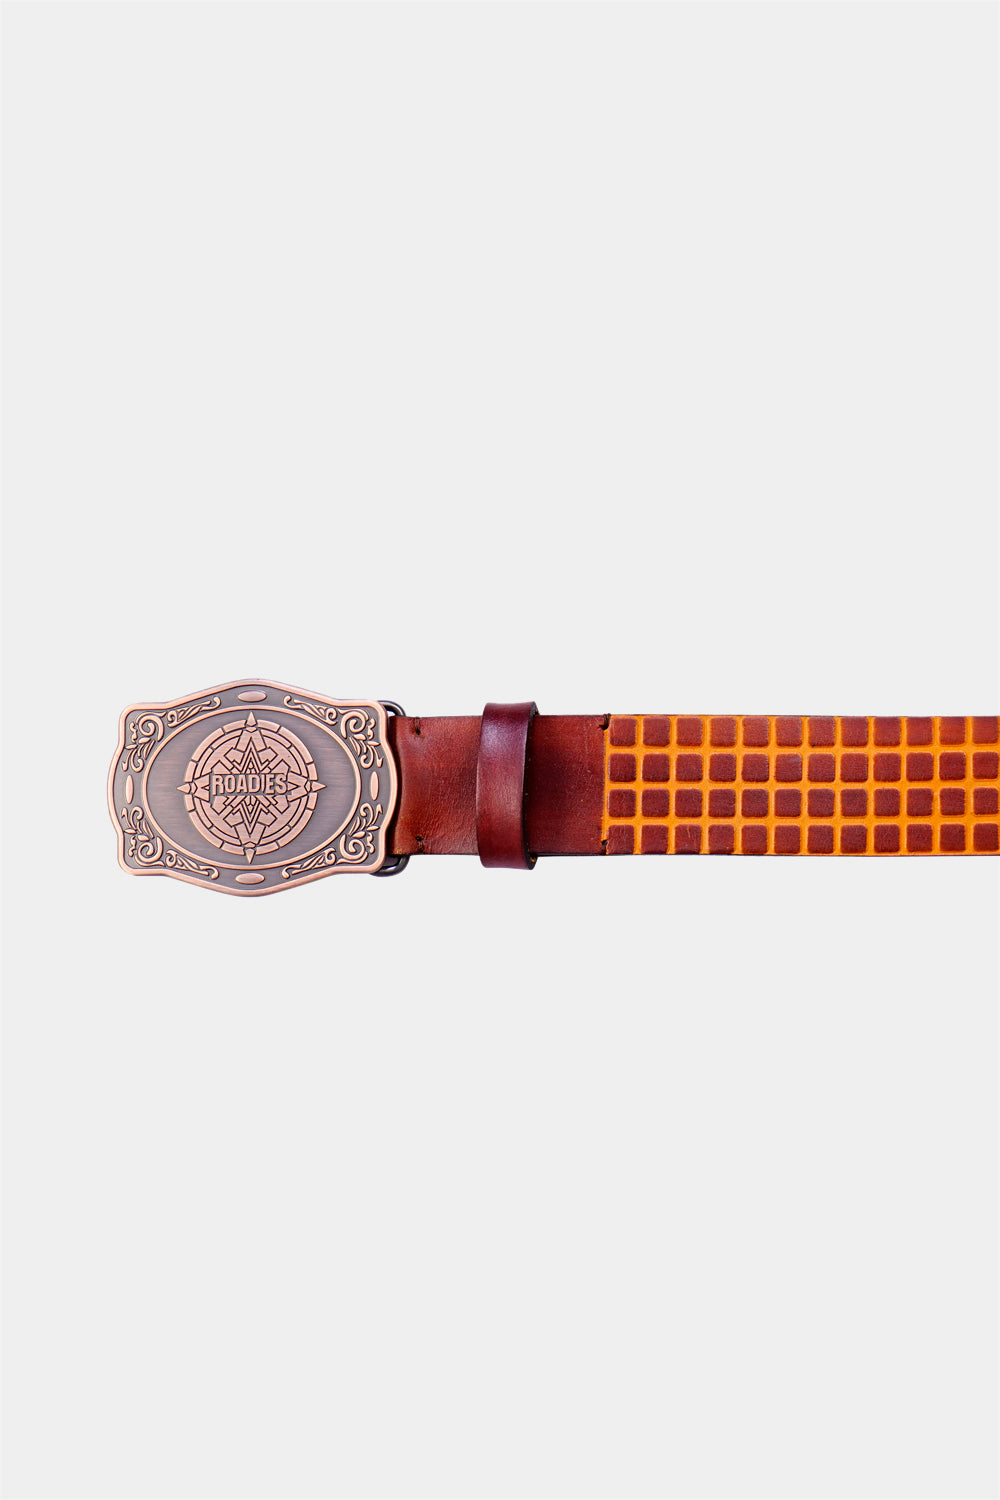 Justanned Brown-Yellow Check Men'S Leather Belt